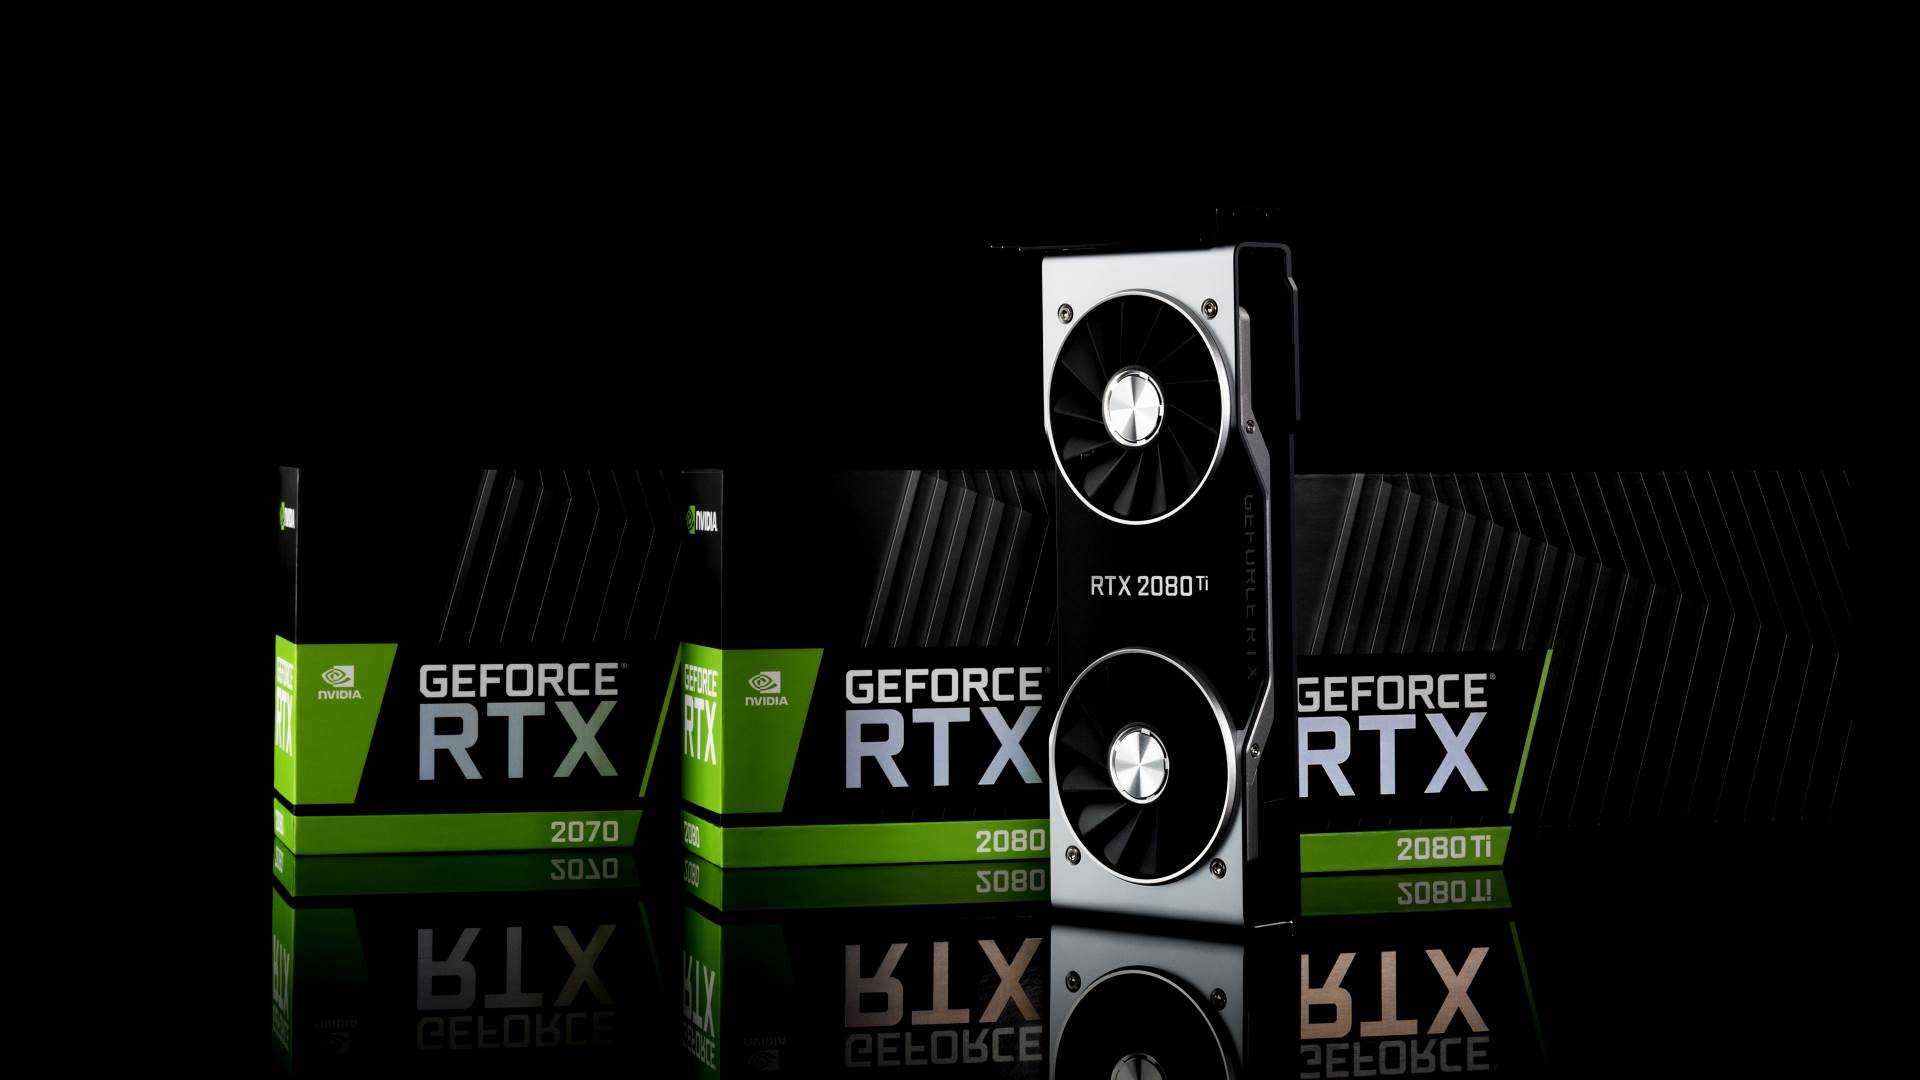 Nvidia Turing GPU – the architecture behind RTX 2080 Ti and RTX 2080 cards PCGamesN